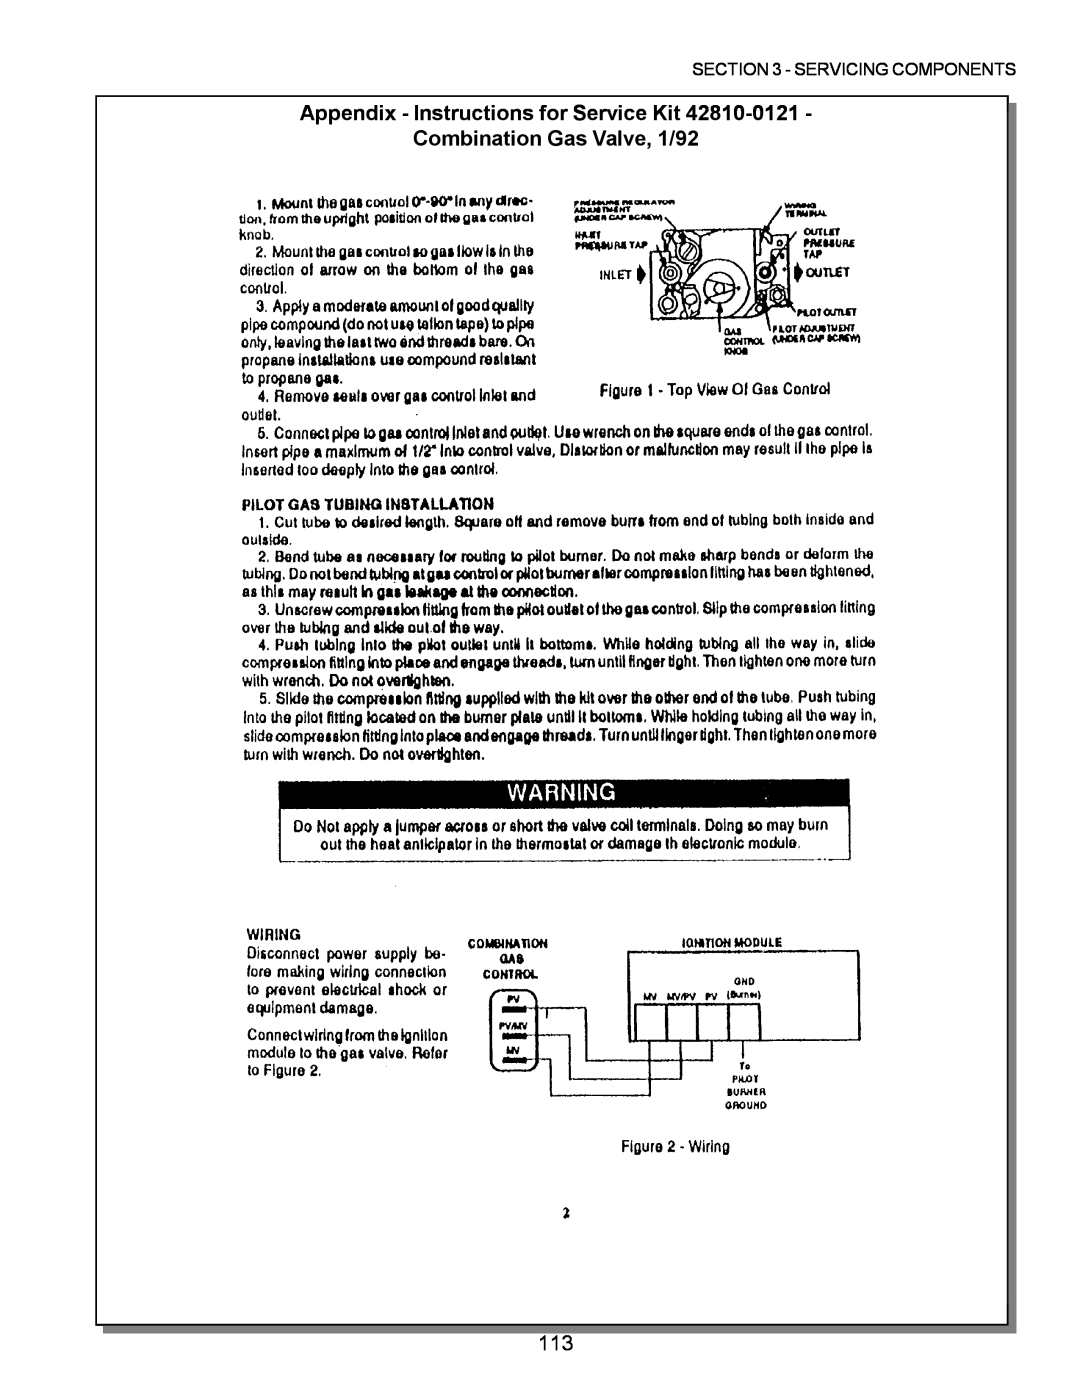 Middleby Marshall PS570, PS360 Appendix - Instructions for Service Kit Combination Gas Valve, 1/92, Servicing Components 